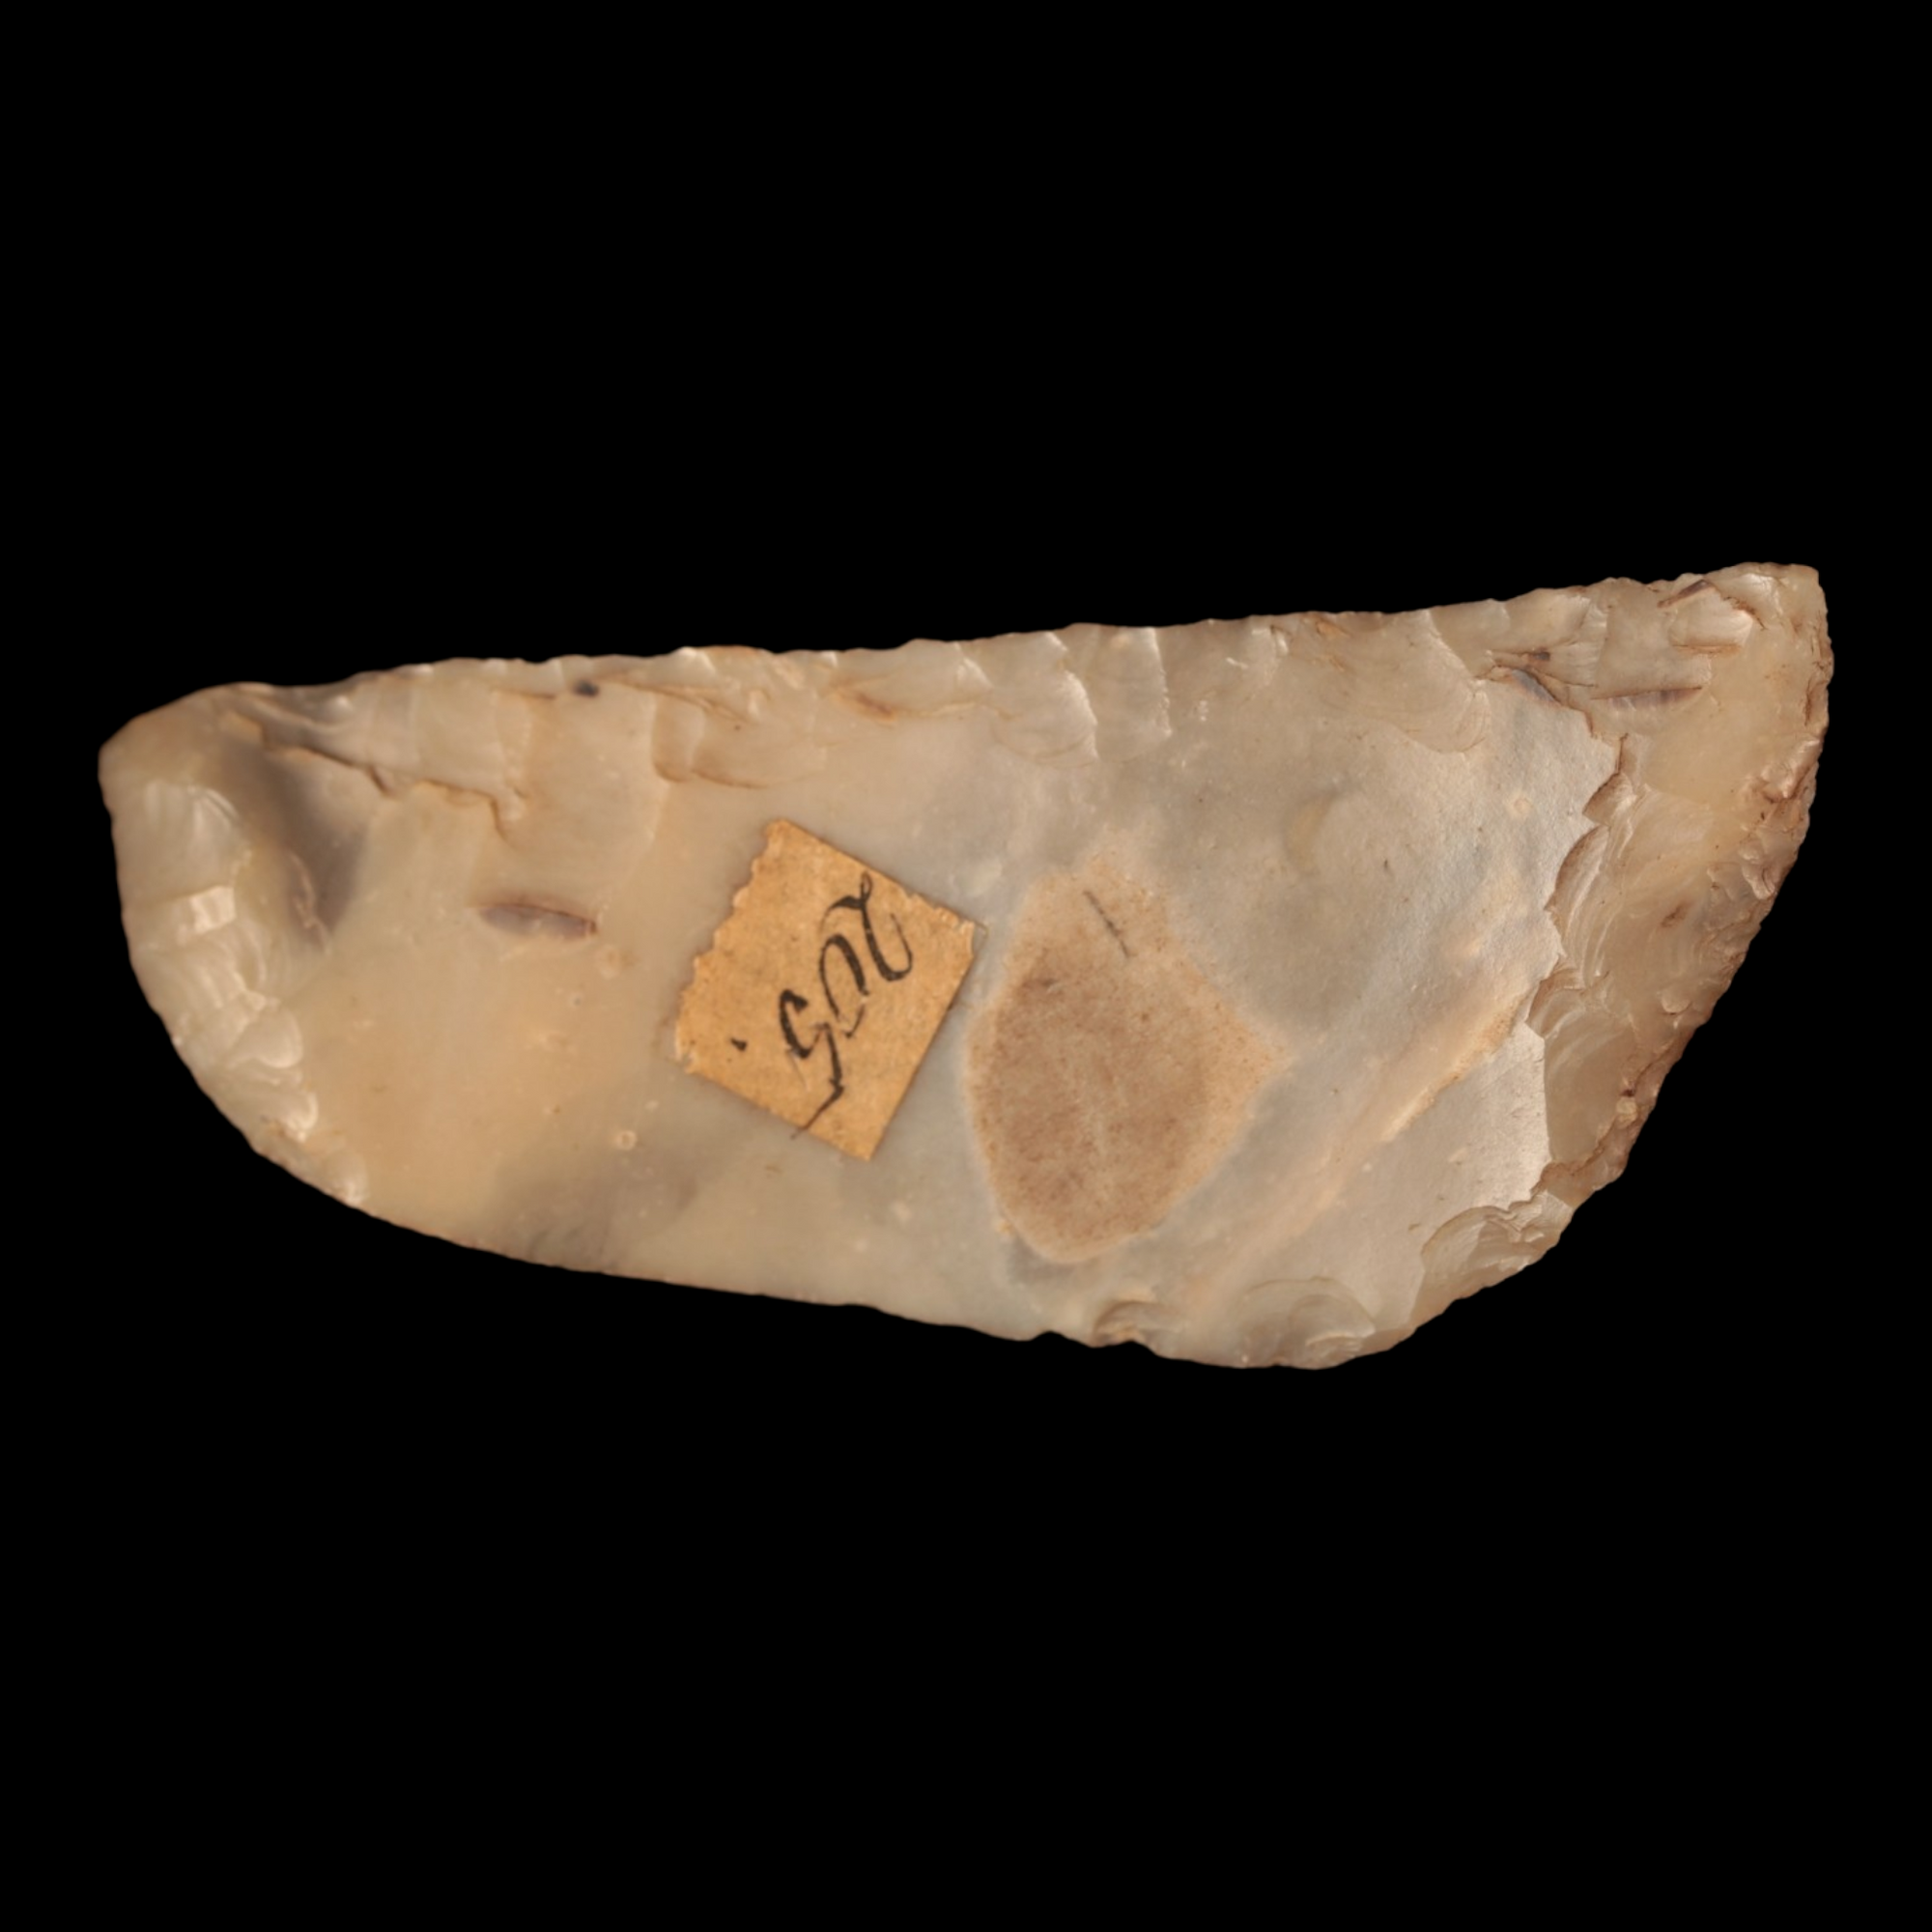 Danish Mesolithic Stone Tool #2 (2.6 inches) - c. 9000 to 5000 BCE - Denmark - 7/12/23 Auction